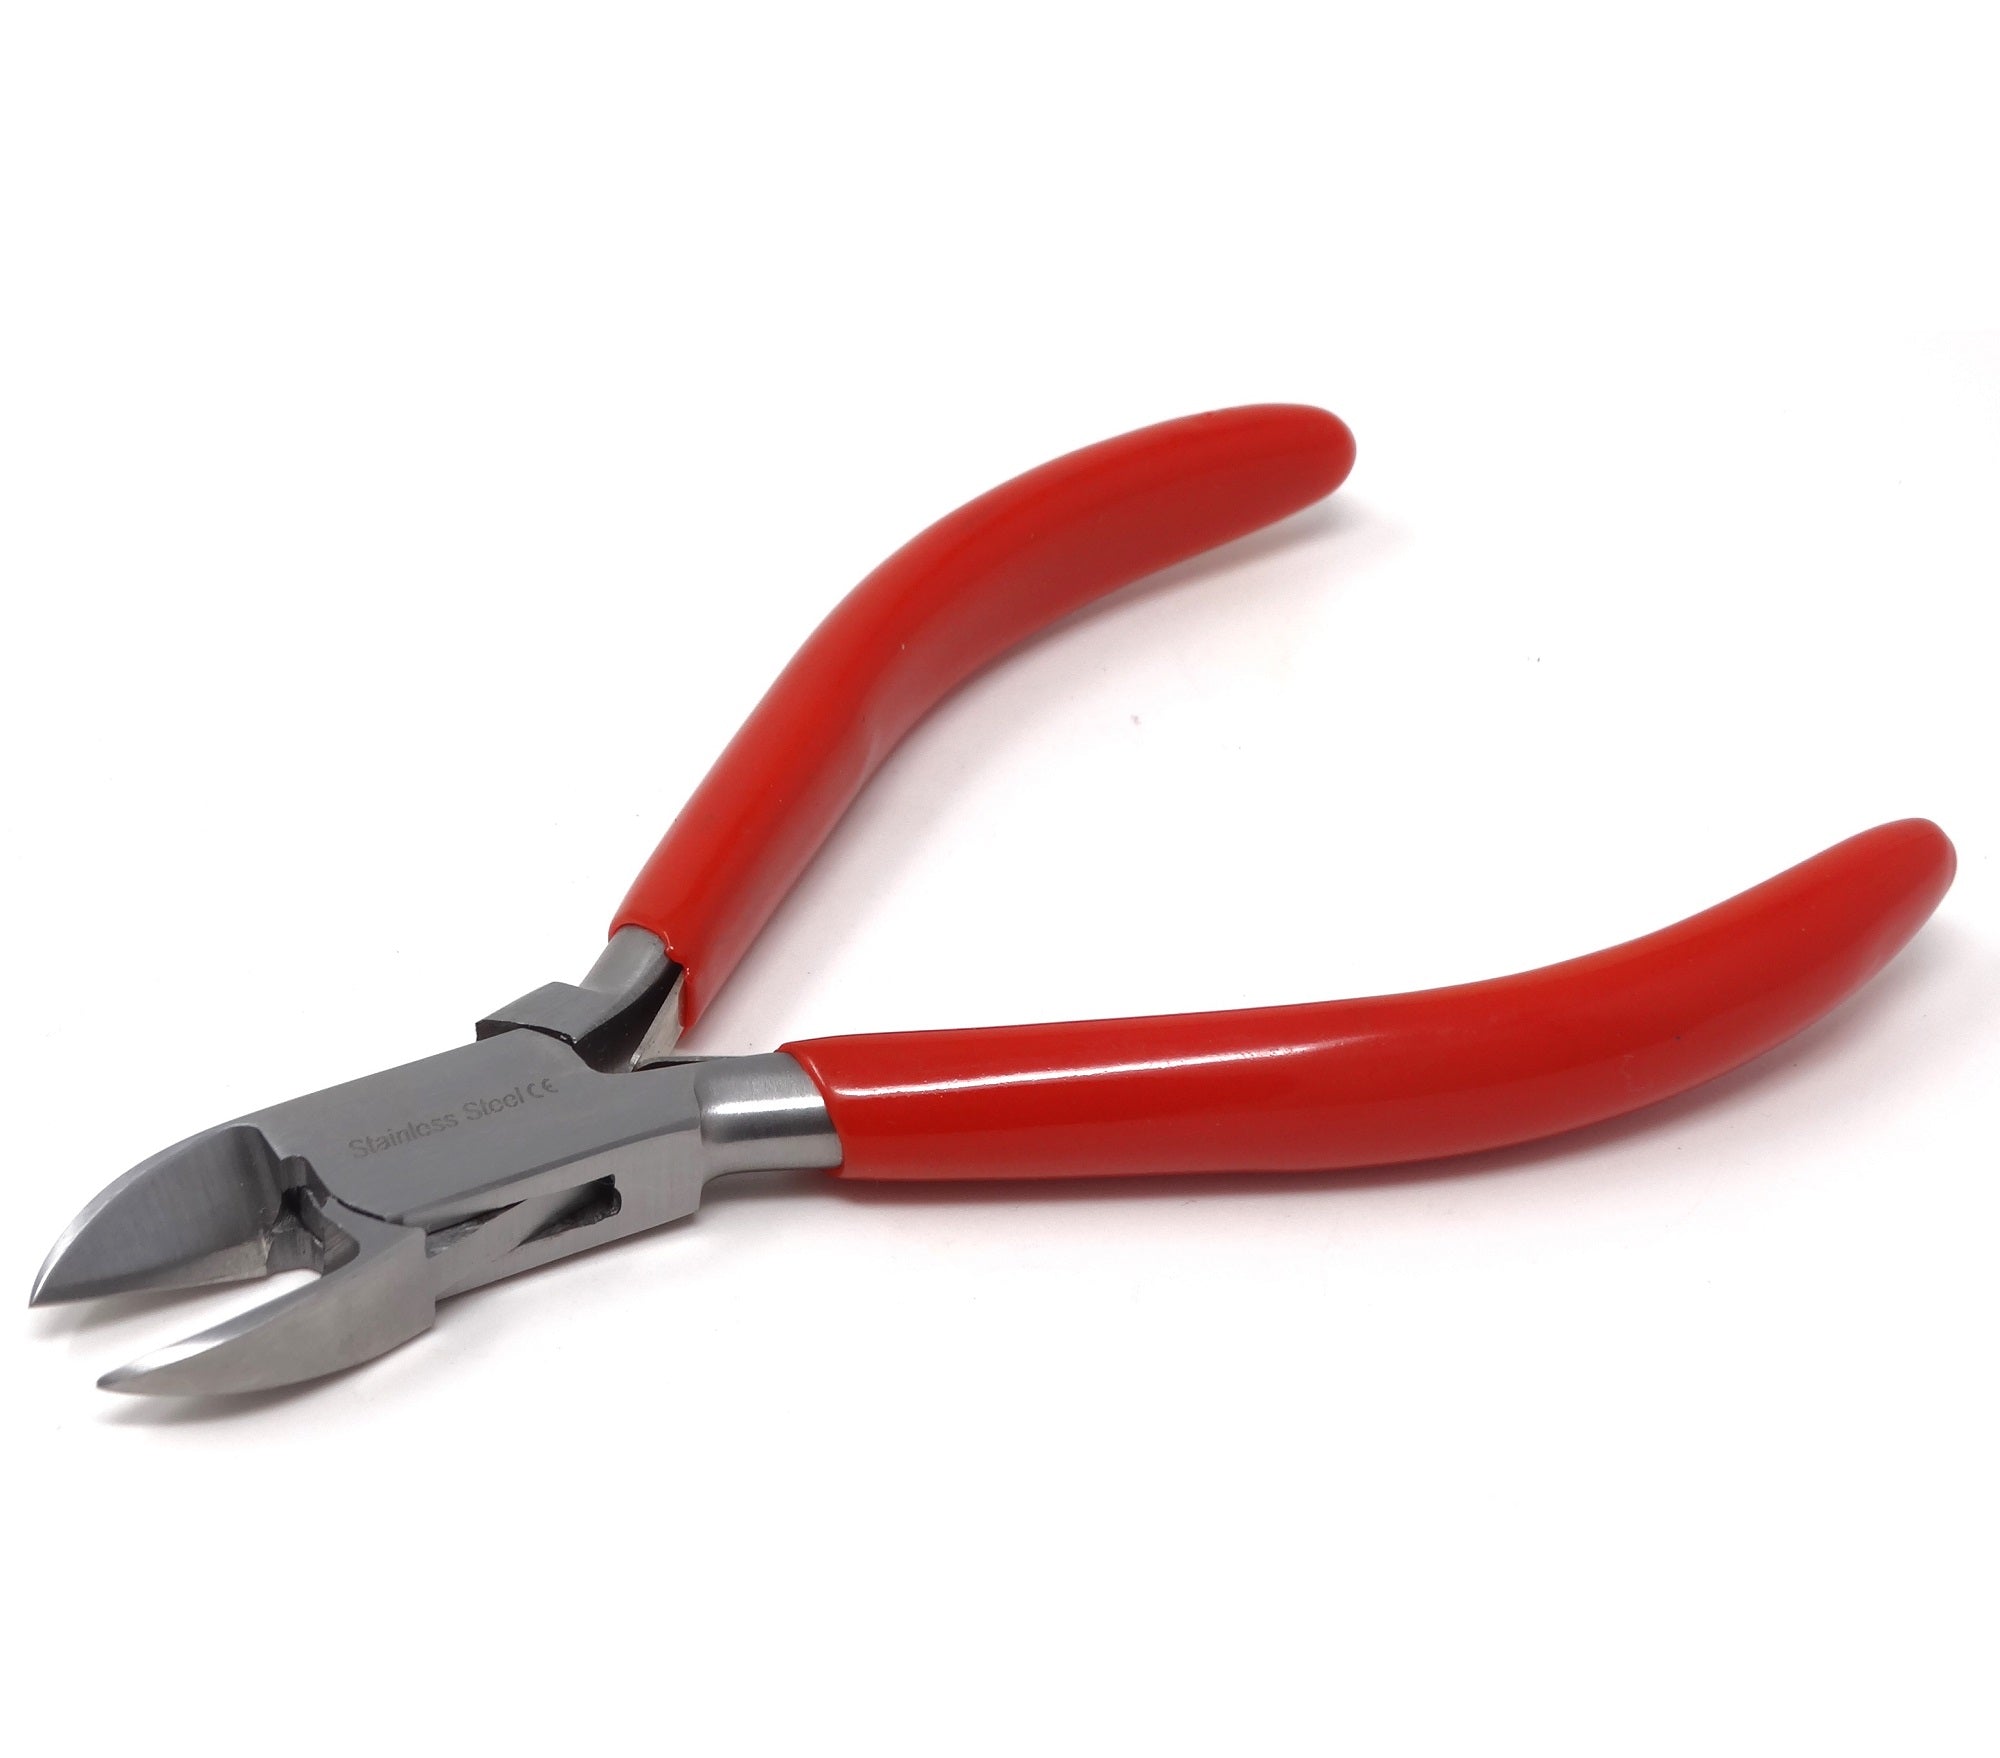 Needle Nose Pliers for DIY Crafts